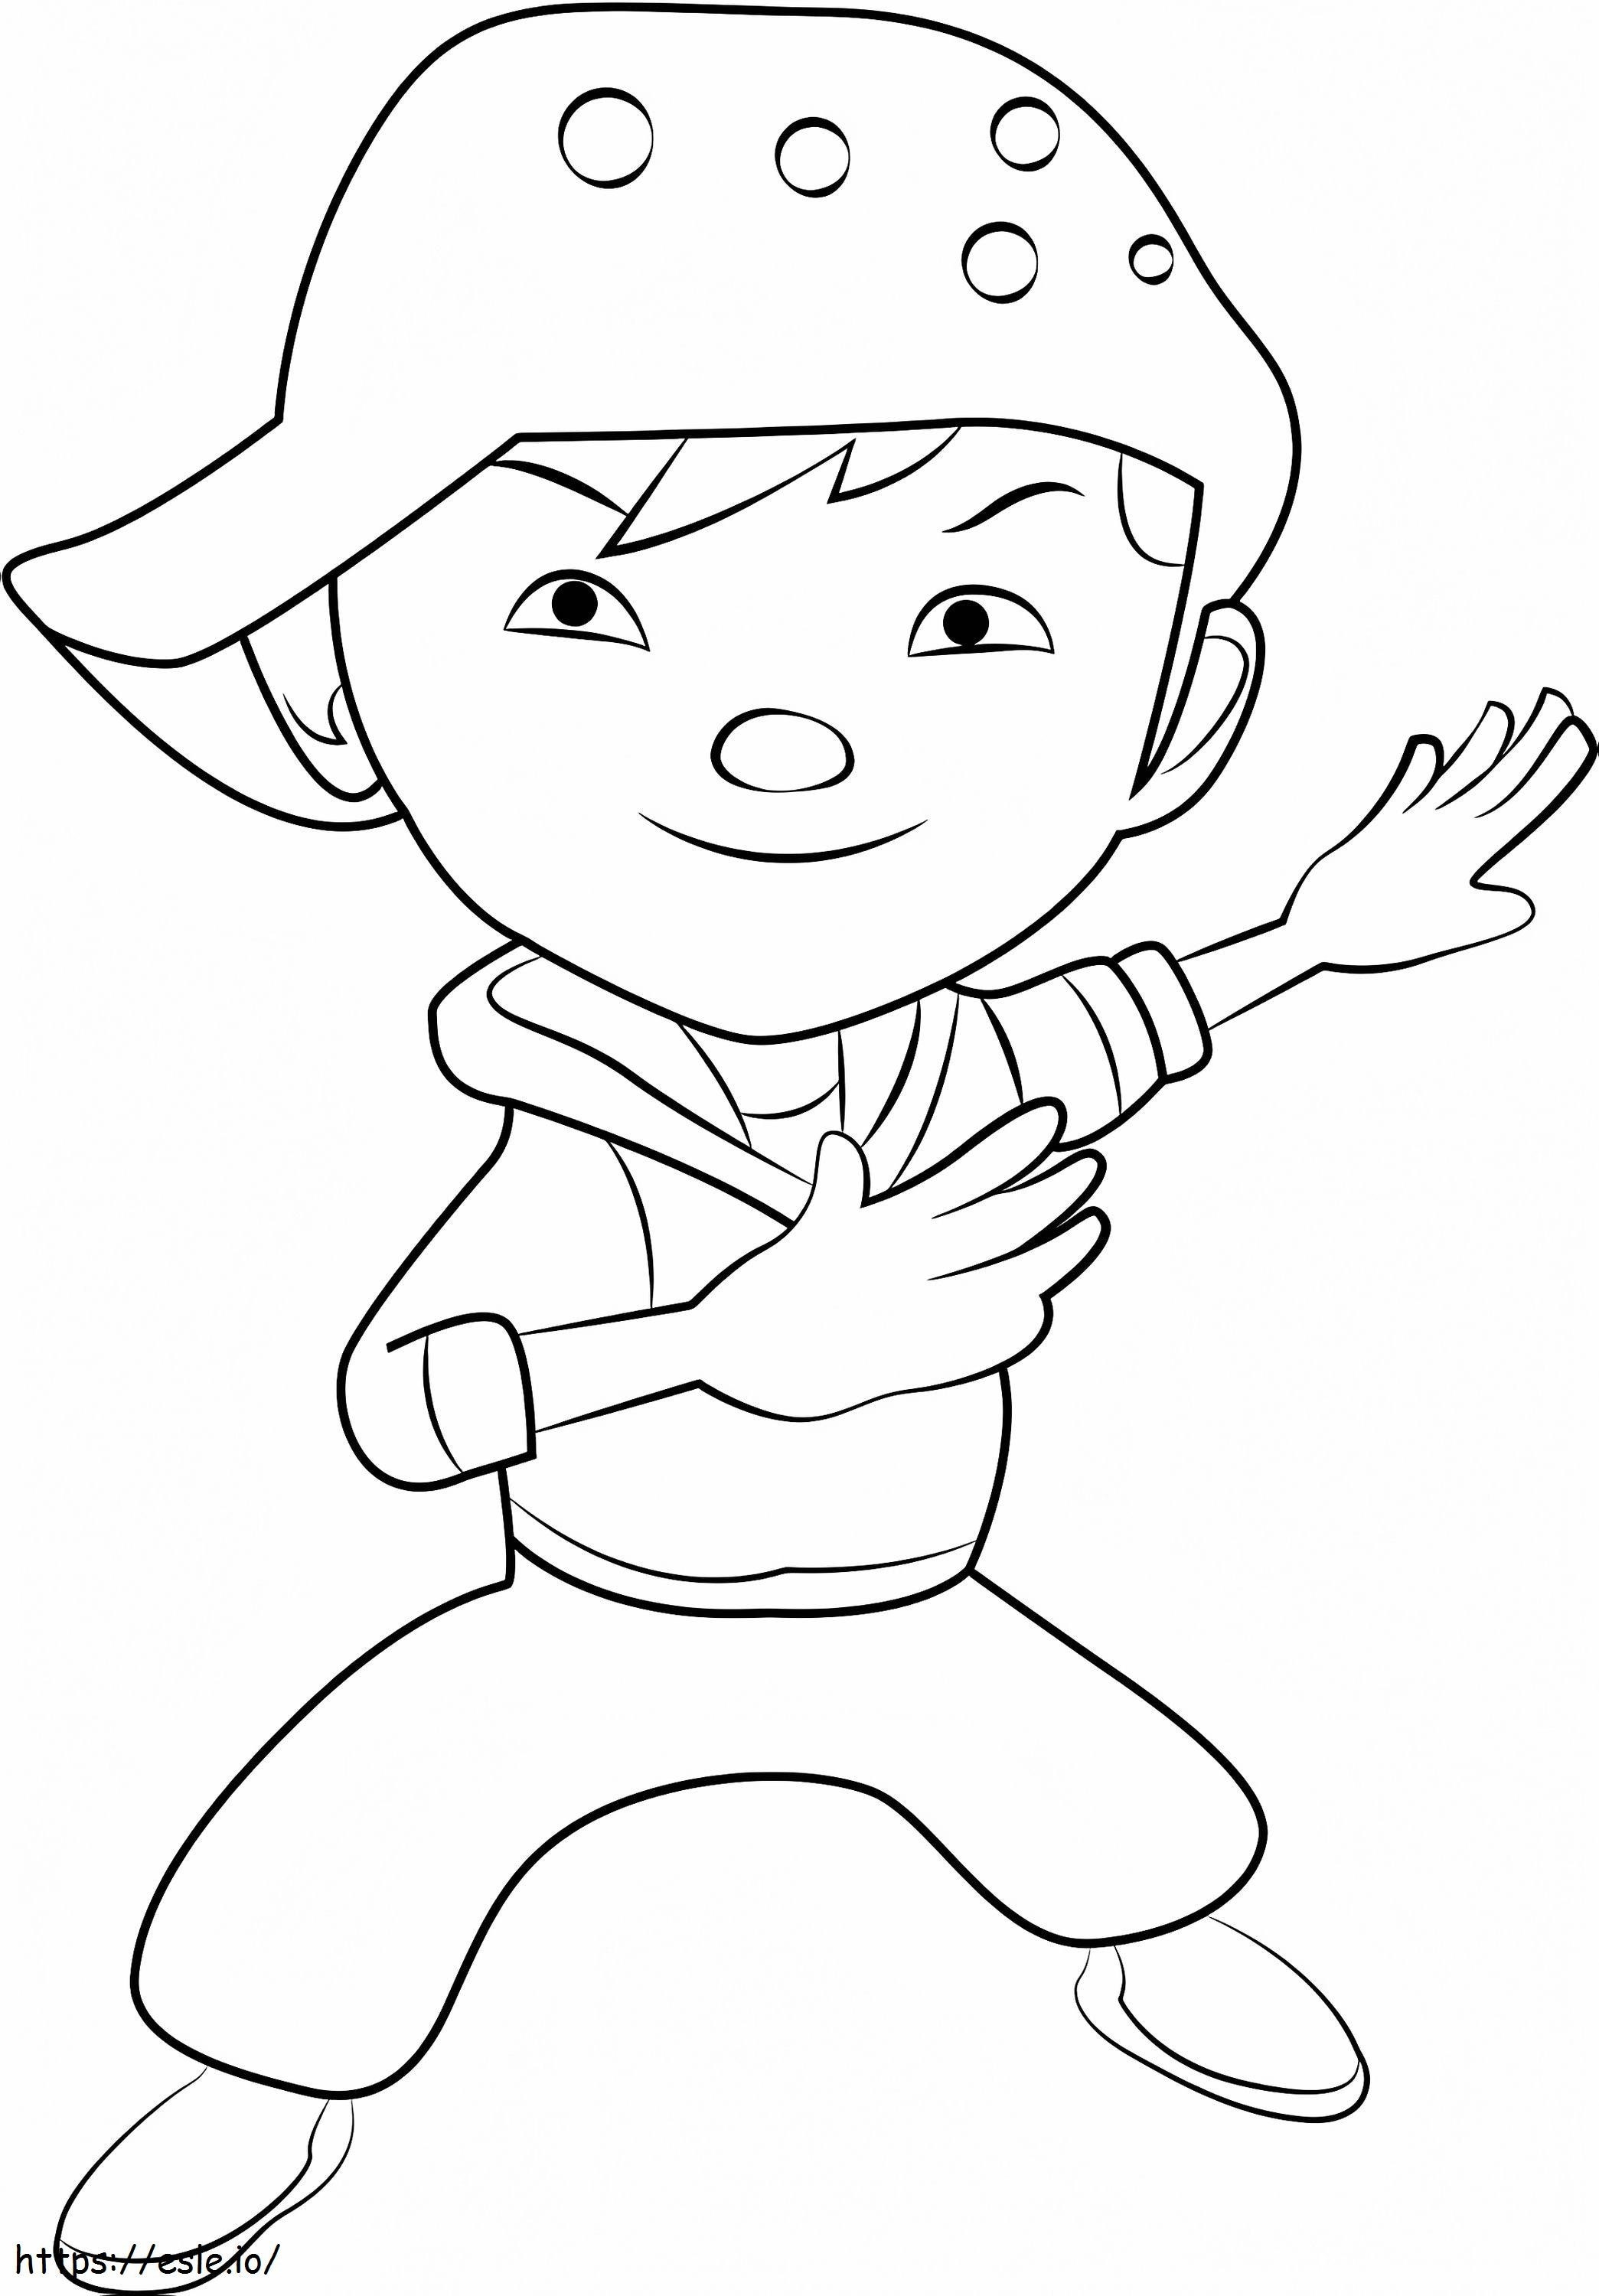 1530325395 Boboiboy Wind1 coloring page